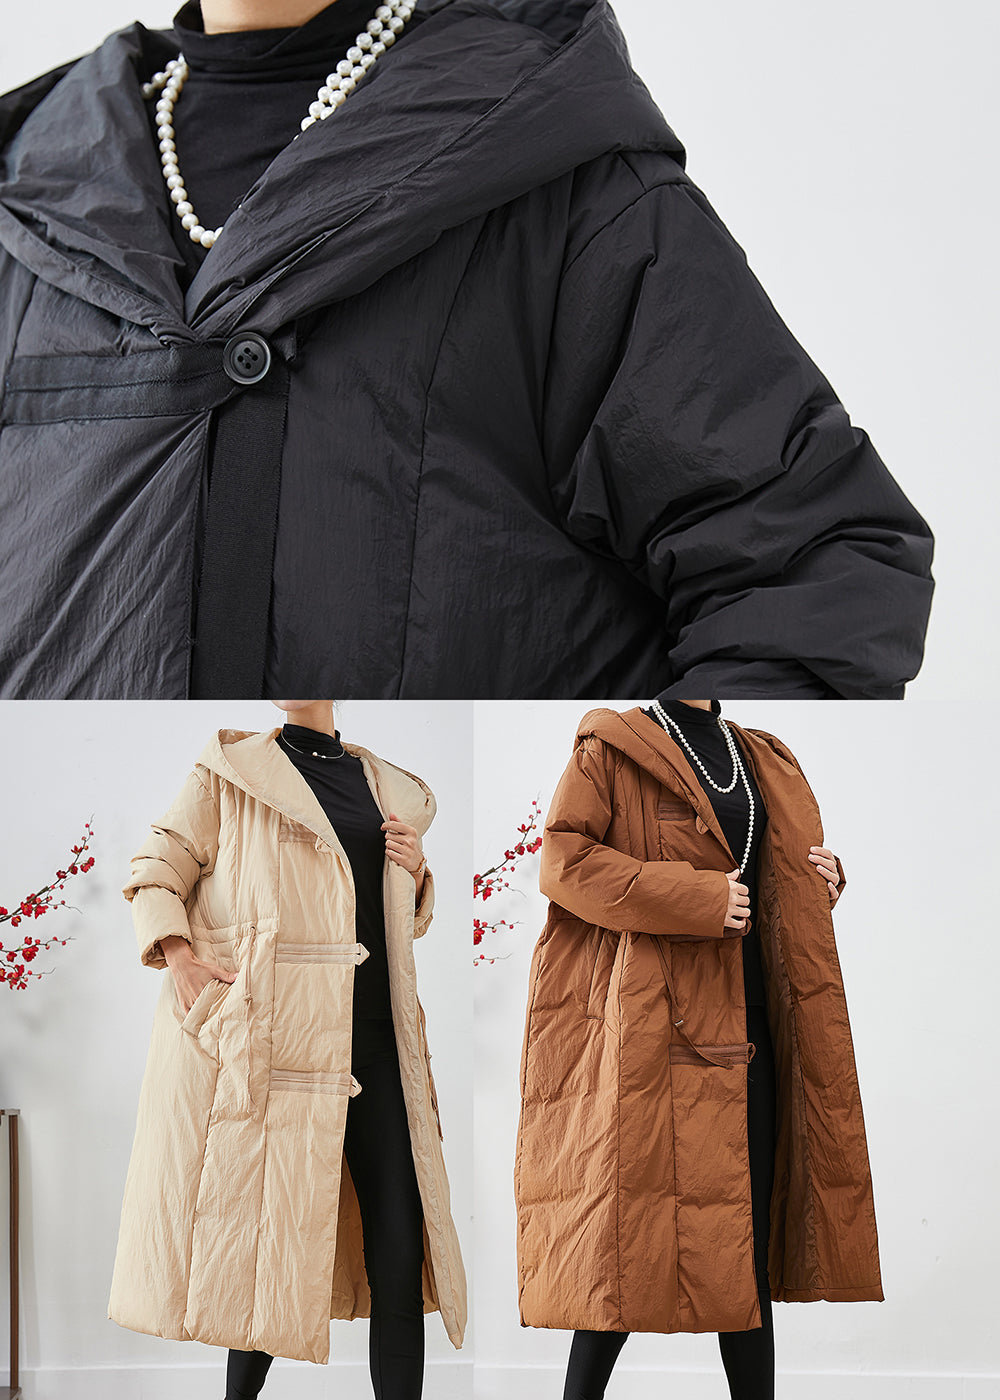 Chic Apricot Hooded Patchwork Duck Down Canada Goose Jacket Winter